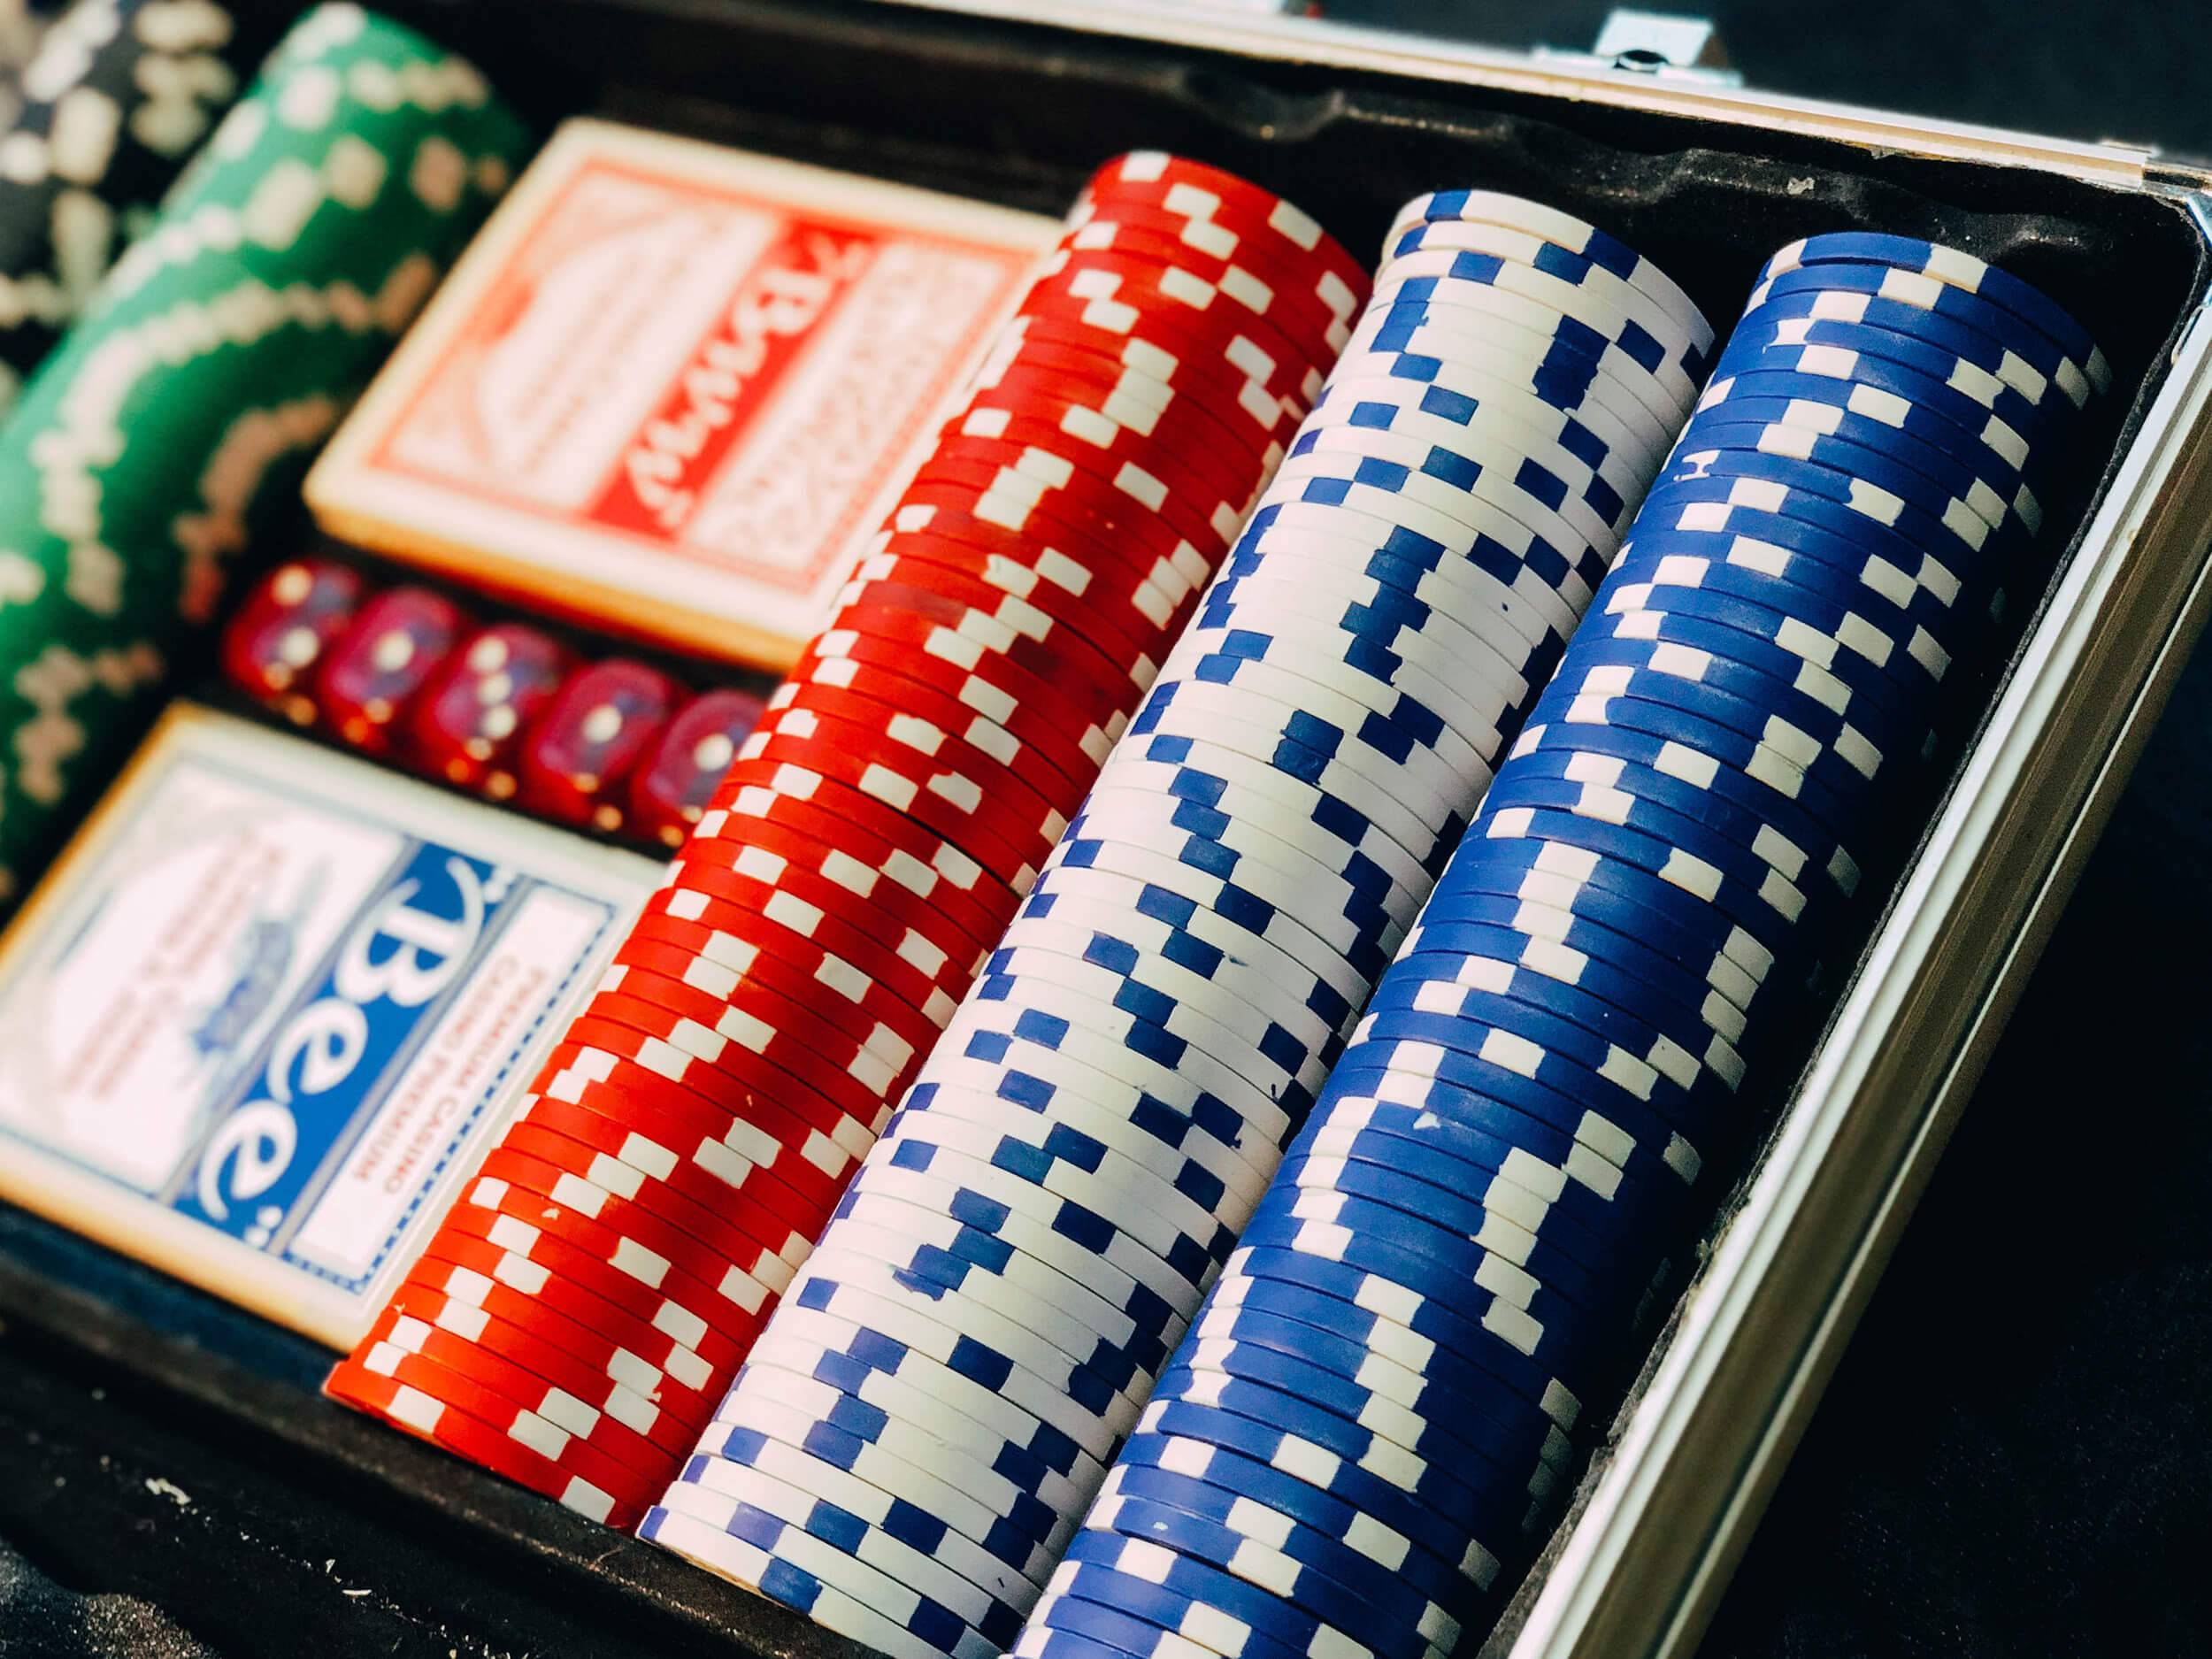 View of casino chips, dice and playing cards.